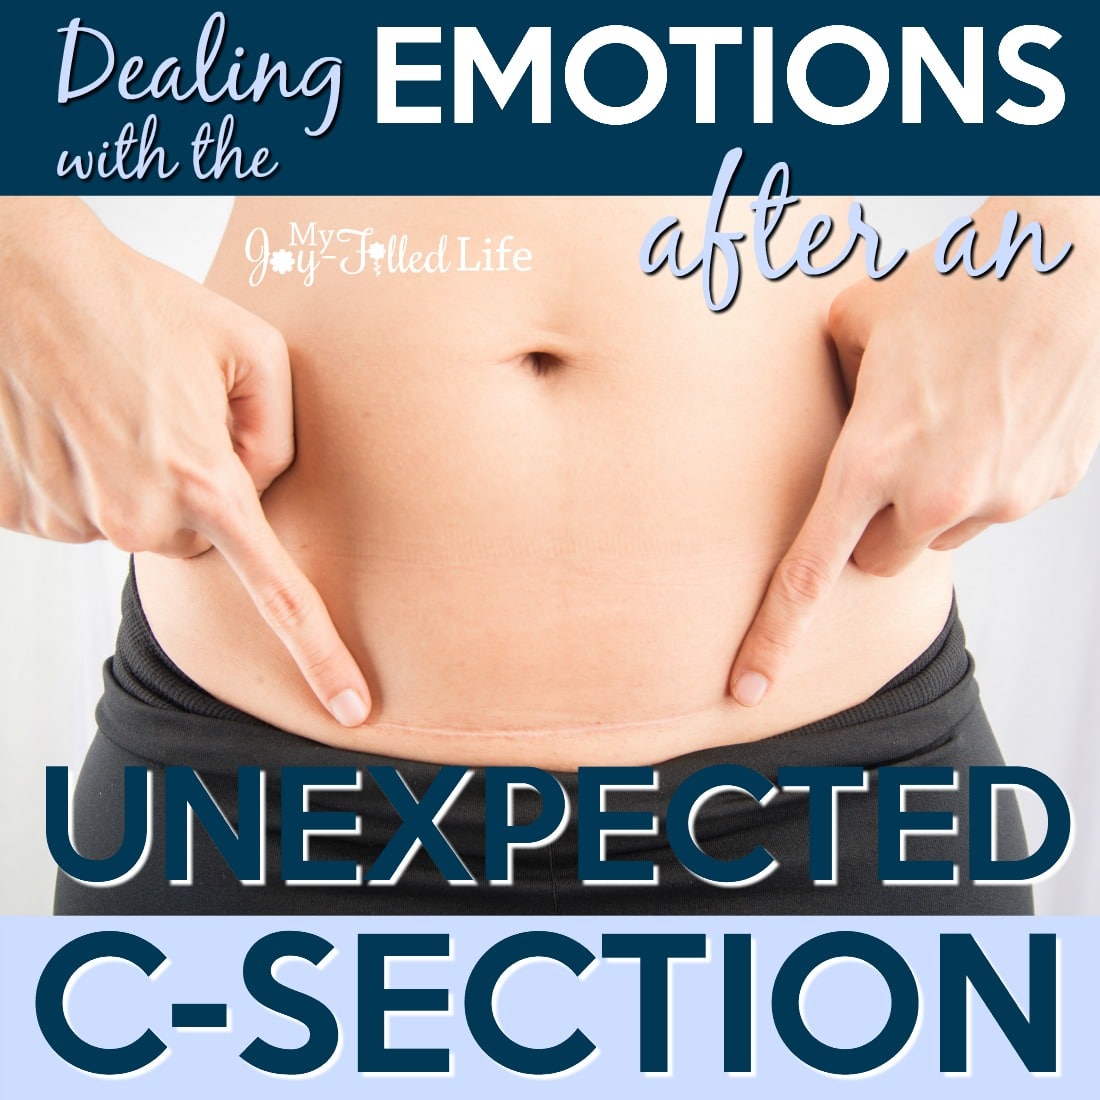 Dealing with the Emotions After an Unexpected C-Section